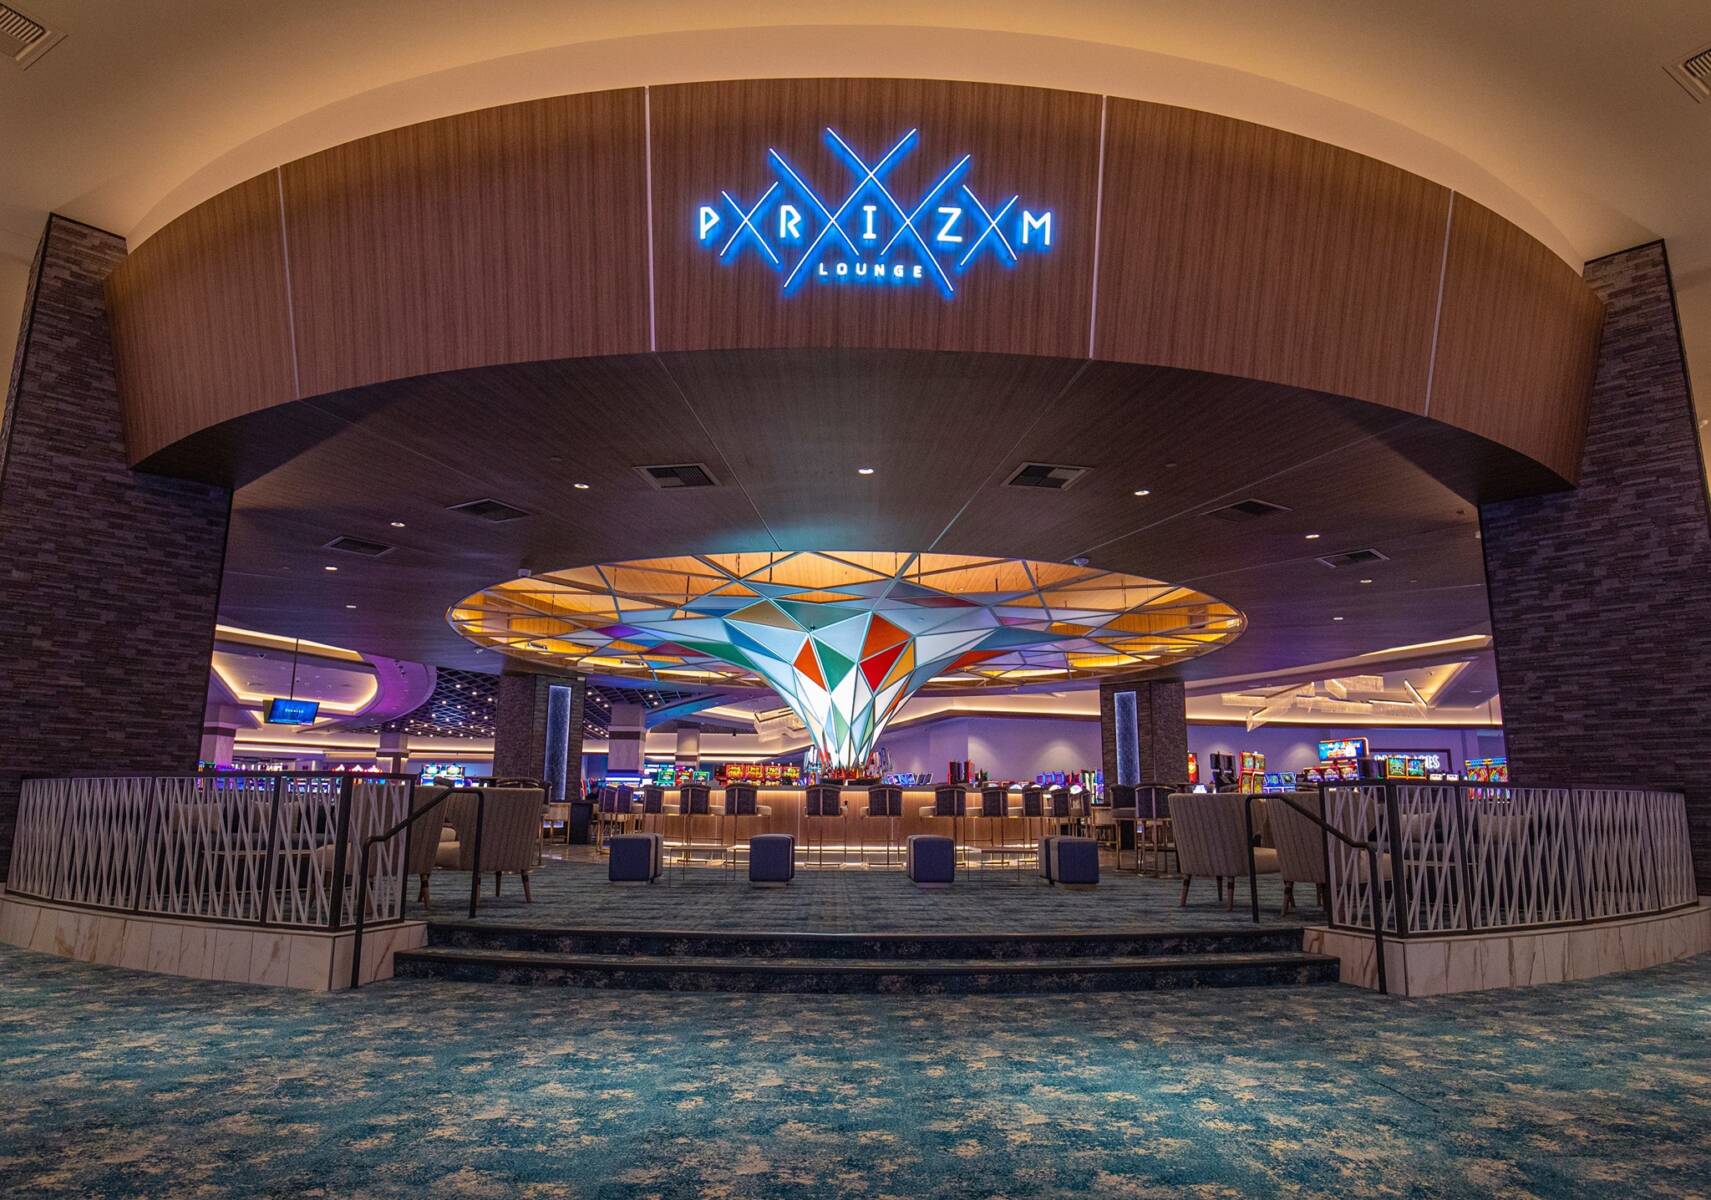 Choctaw Casino & Resort Prize Lounge. This gambling floor bar features blue patterned flooring tile meant to illustrate superior flooring installation capabilities.